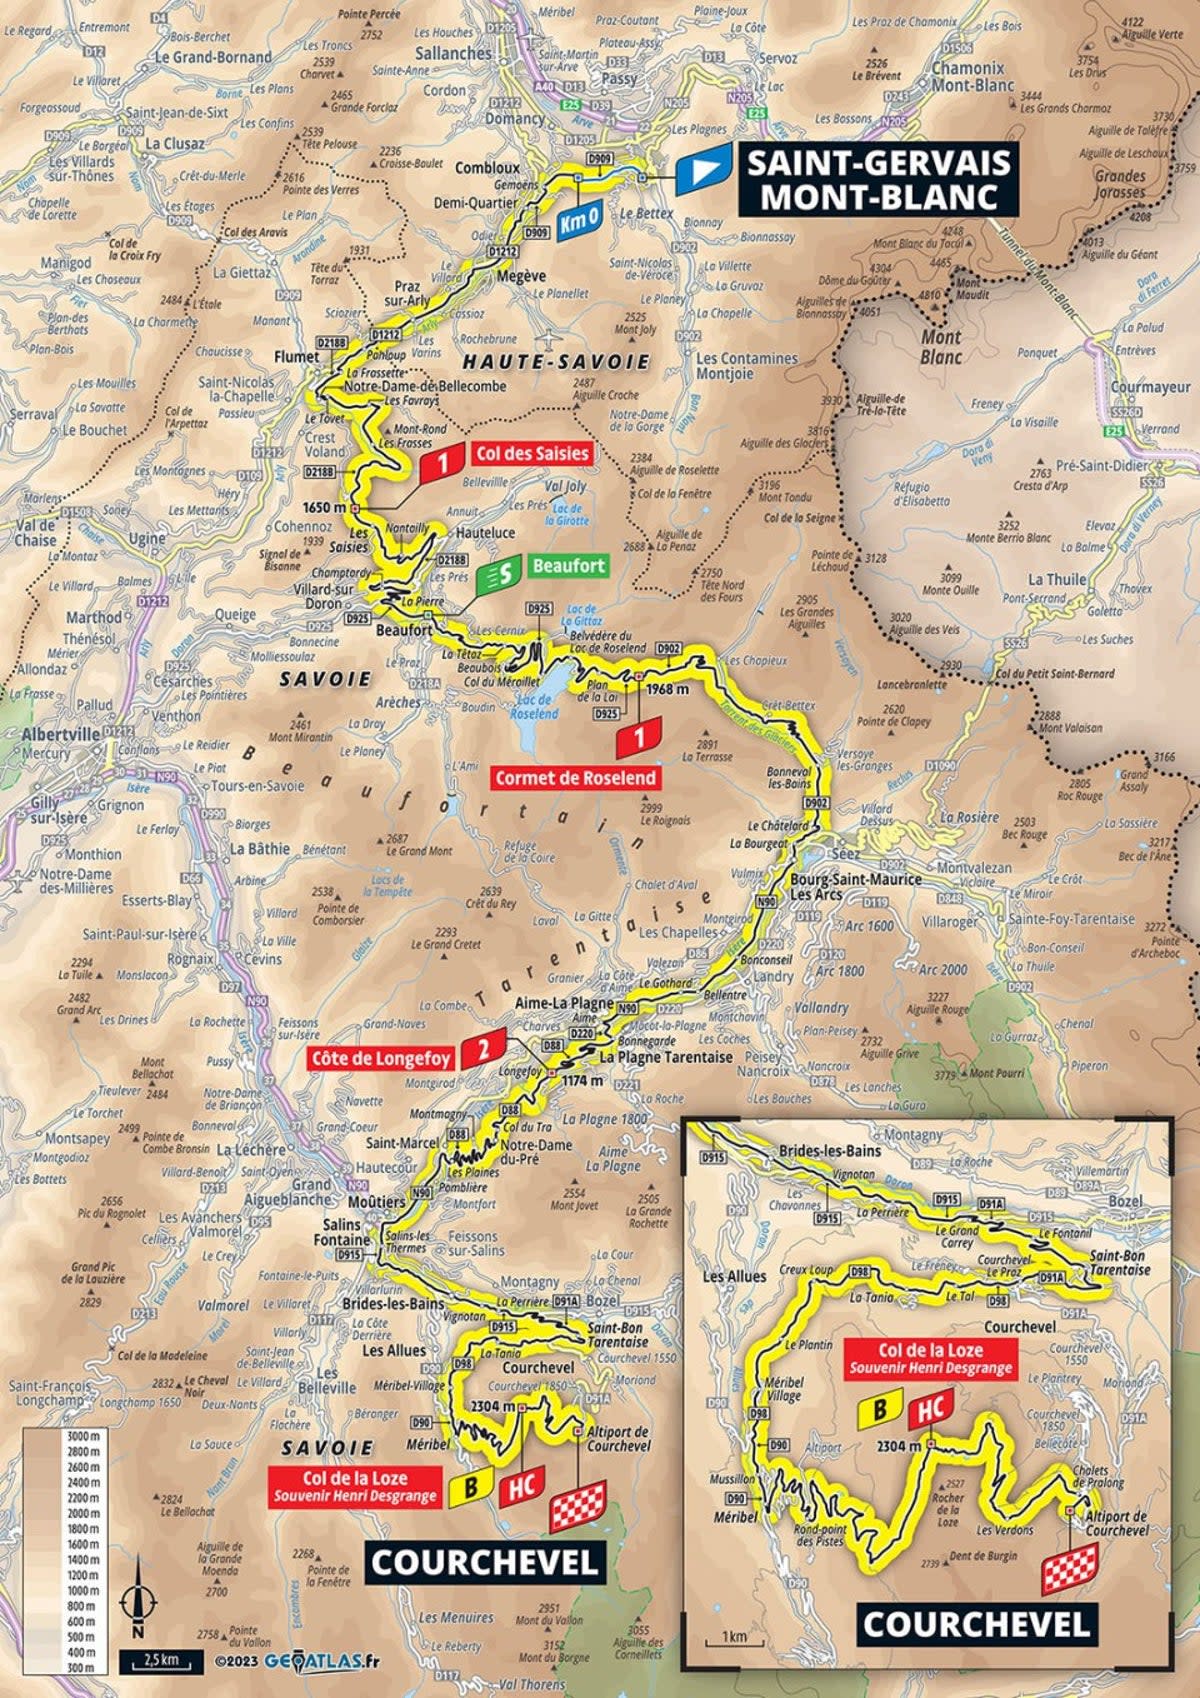 Stage 17 map (letour)